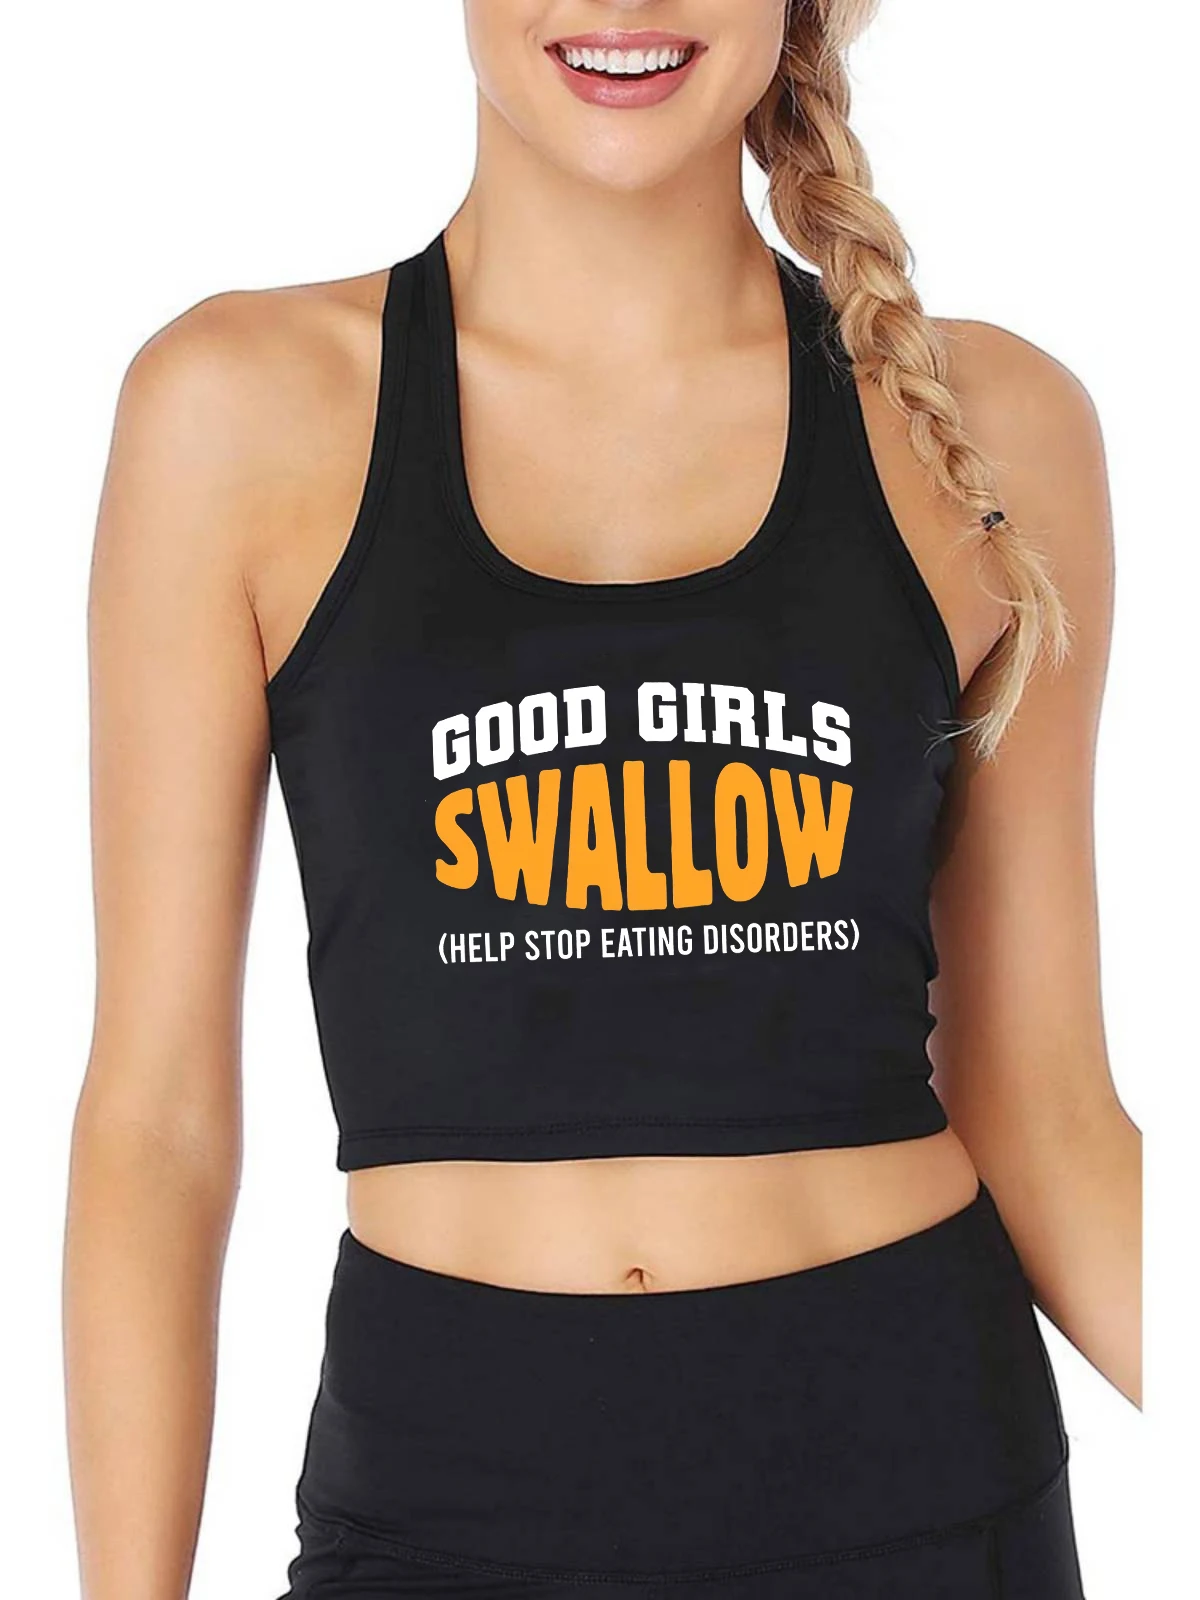 

Good Girls Swallow Help Stop Eating Disorders Design Slim Fit Crop Top Hotwife Sexy Flirting Tank Tops Swinger Funny Camisole